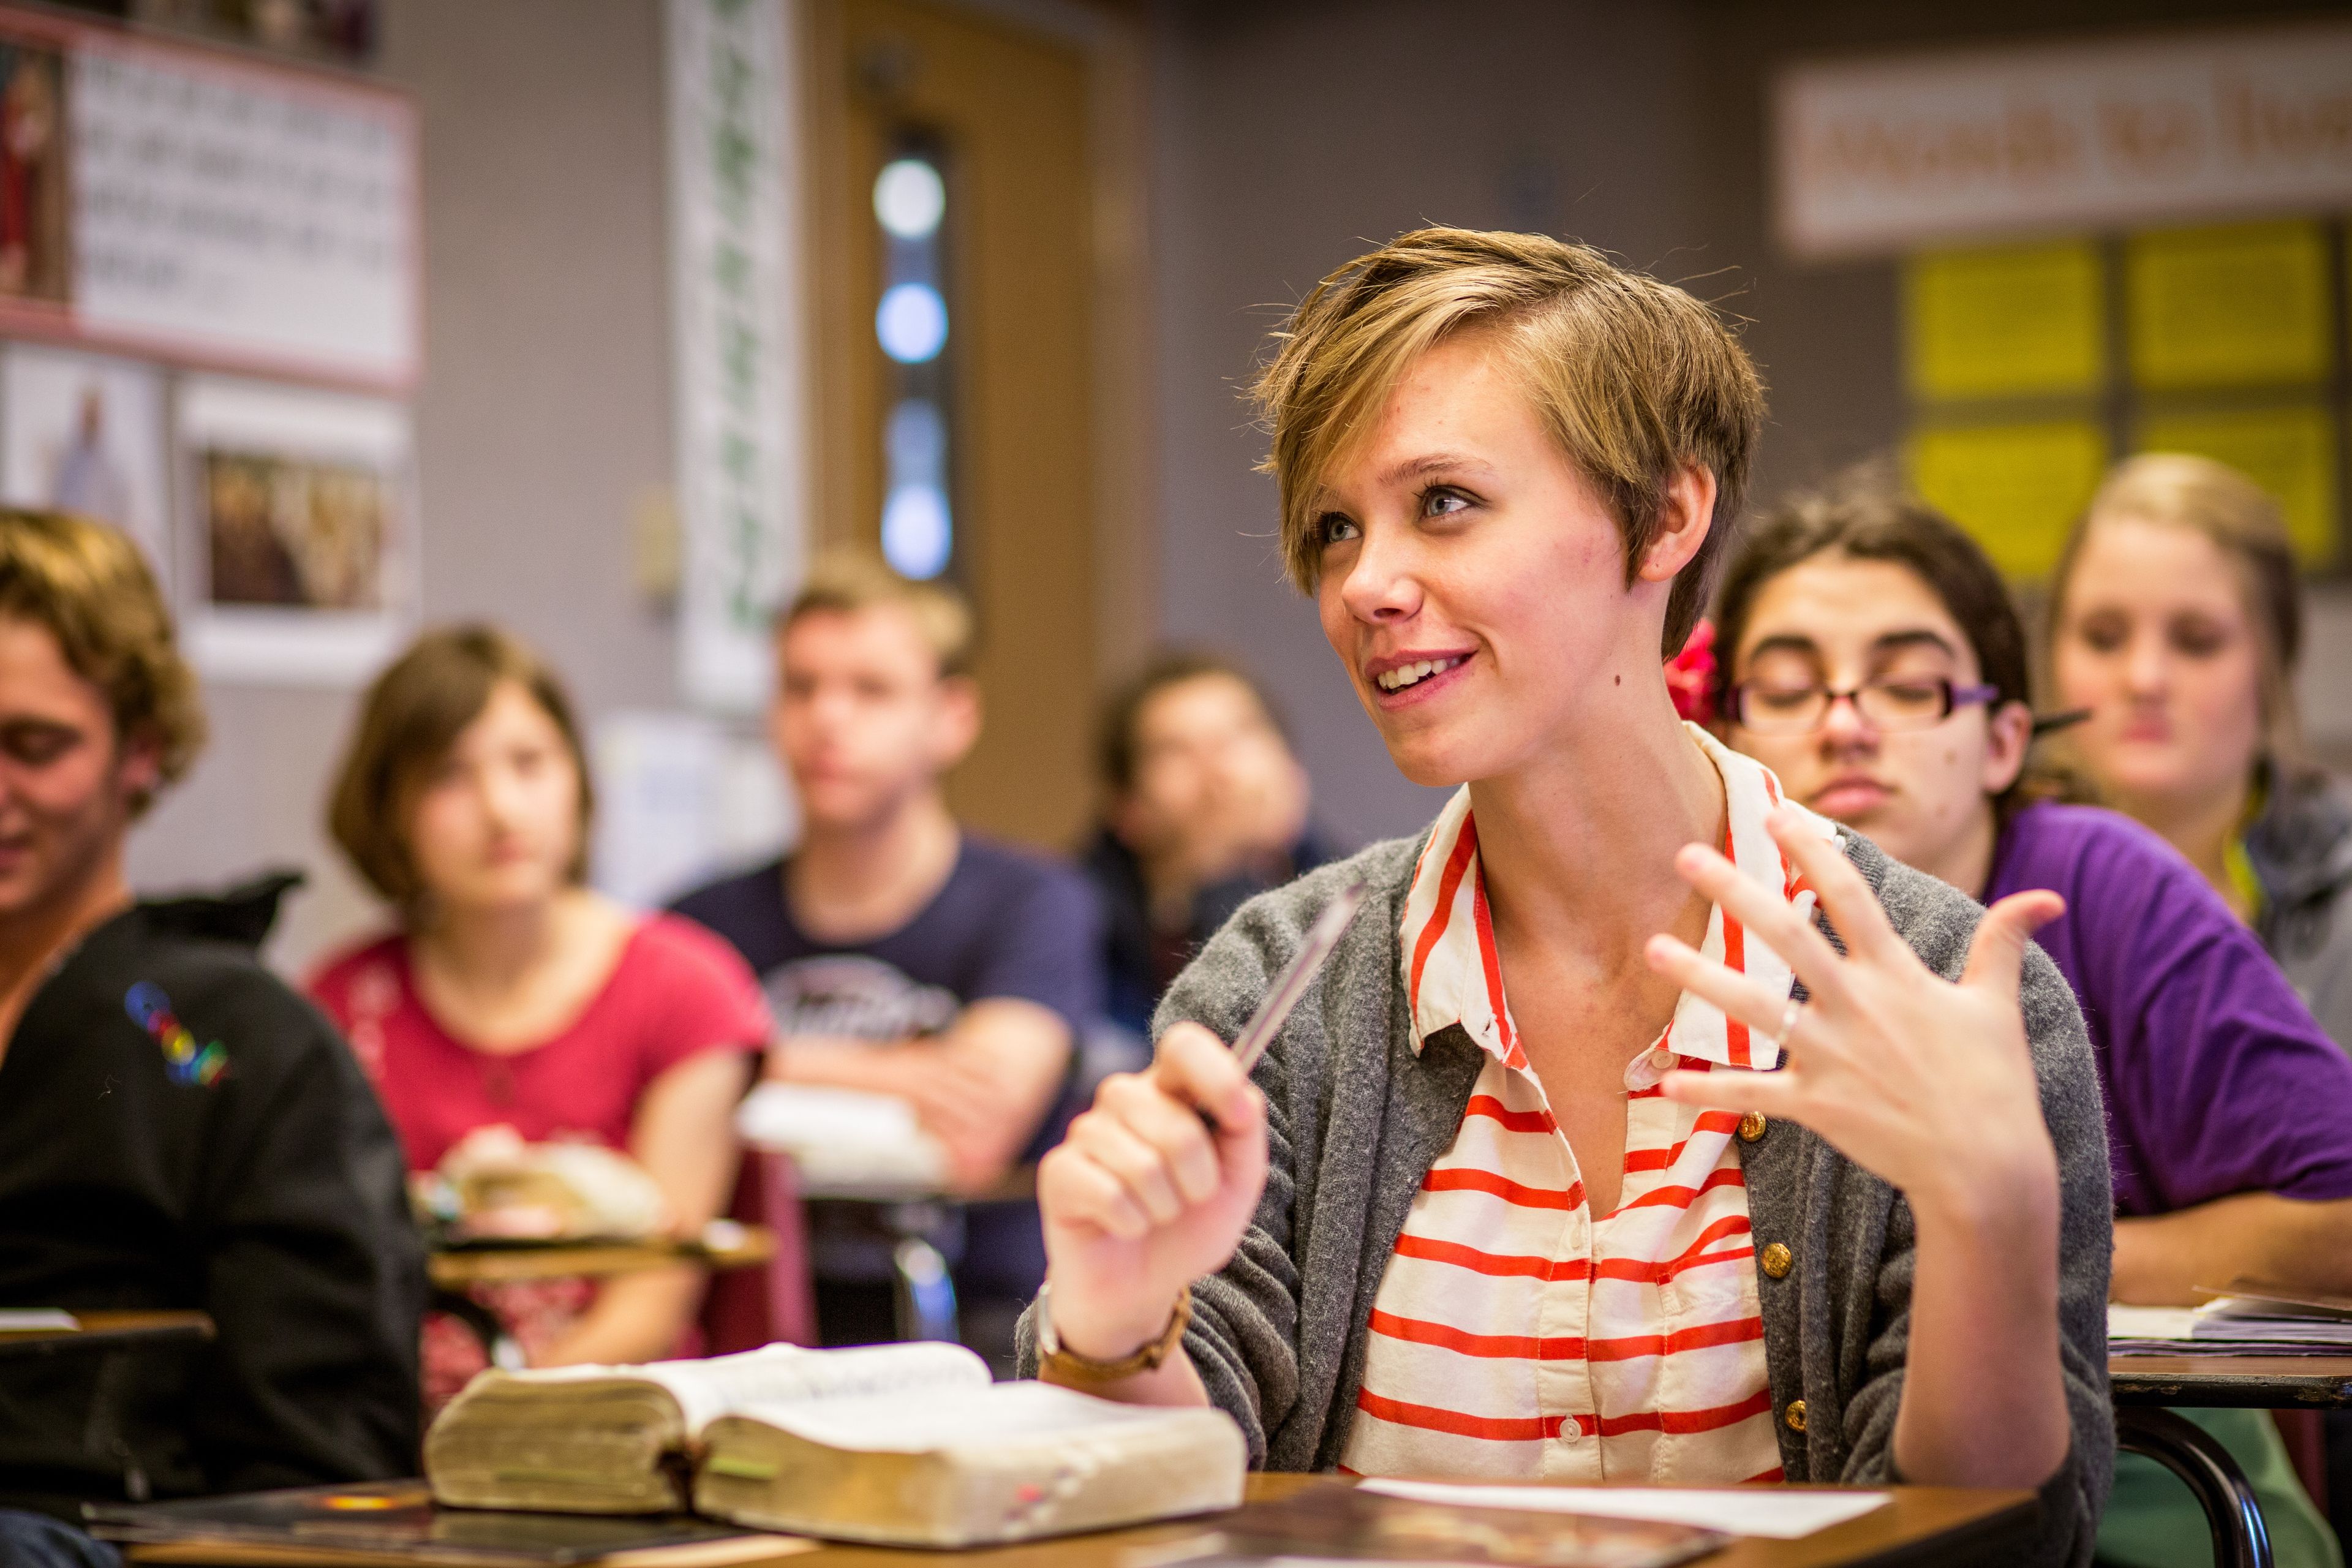 A young woman speaks up during seminary class.